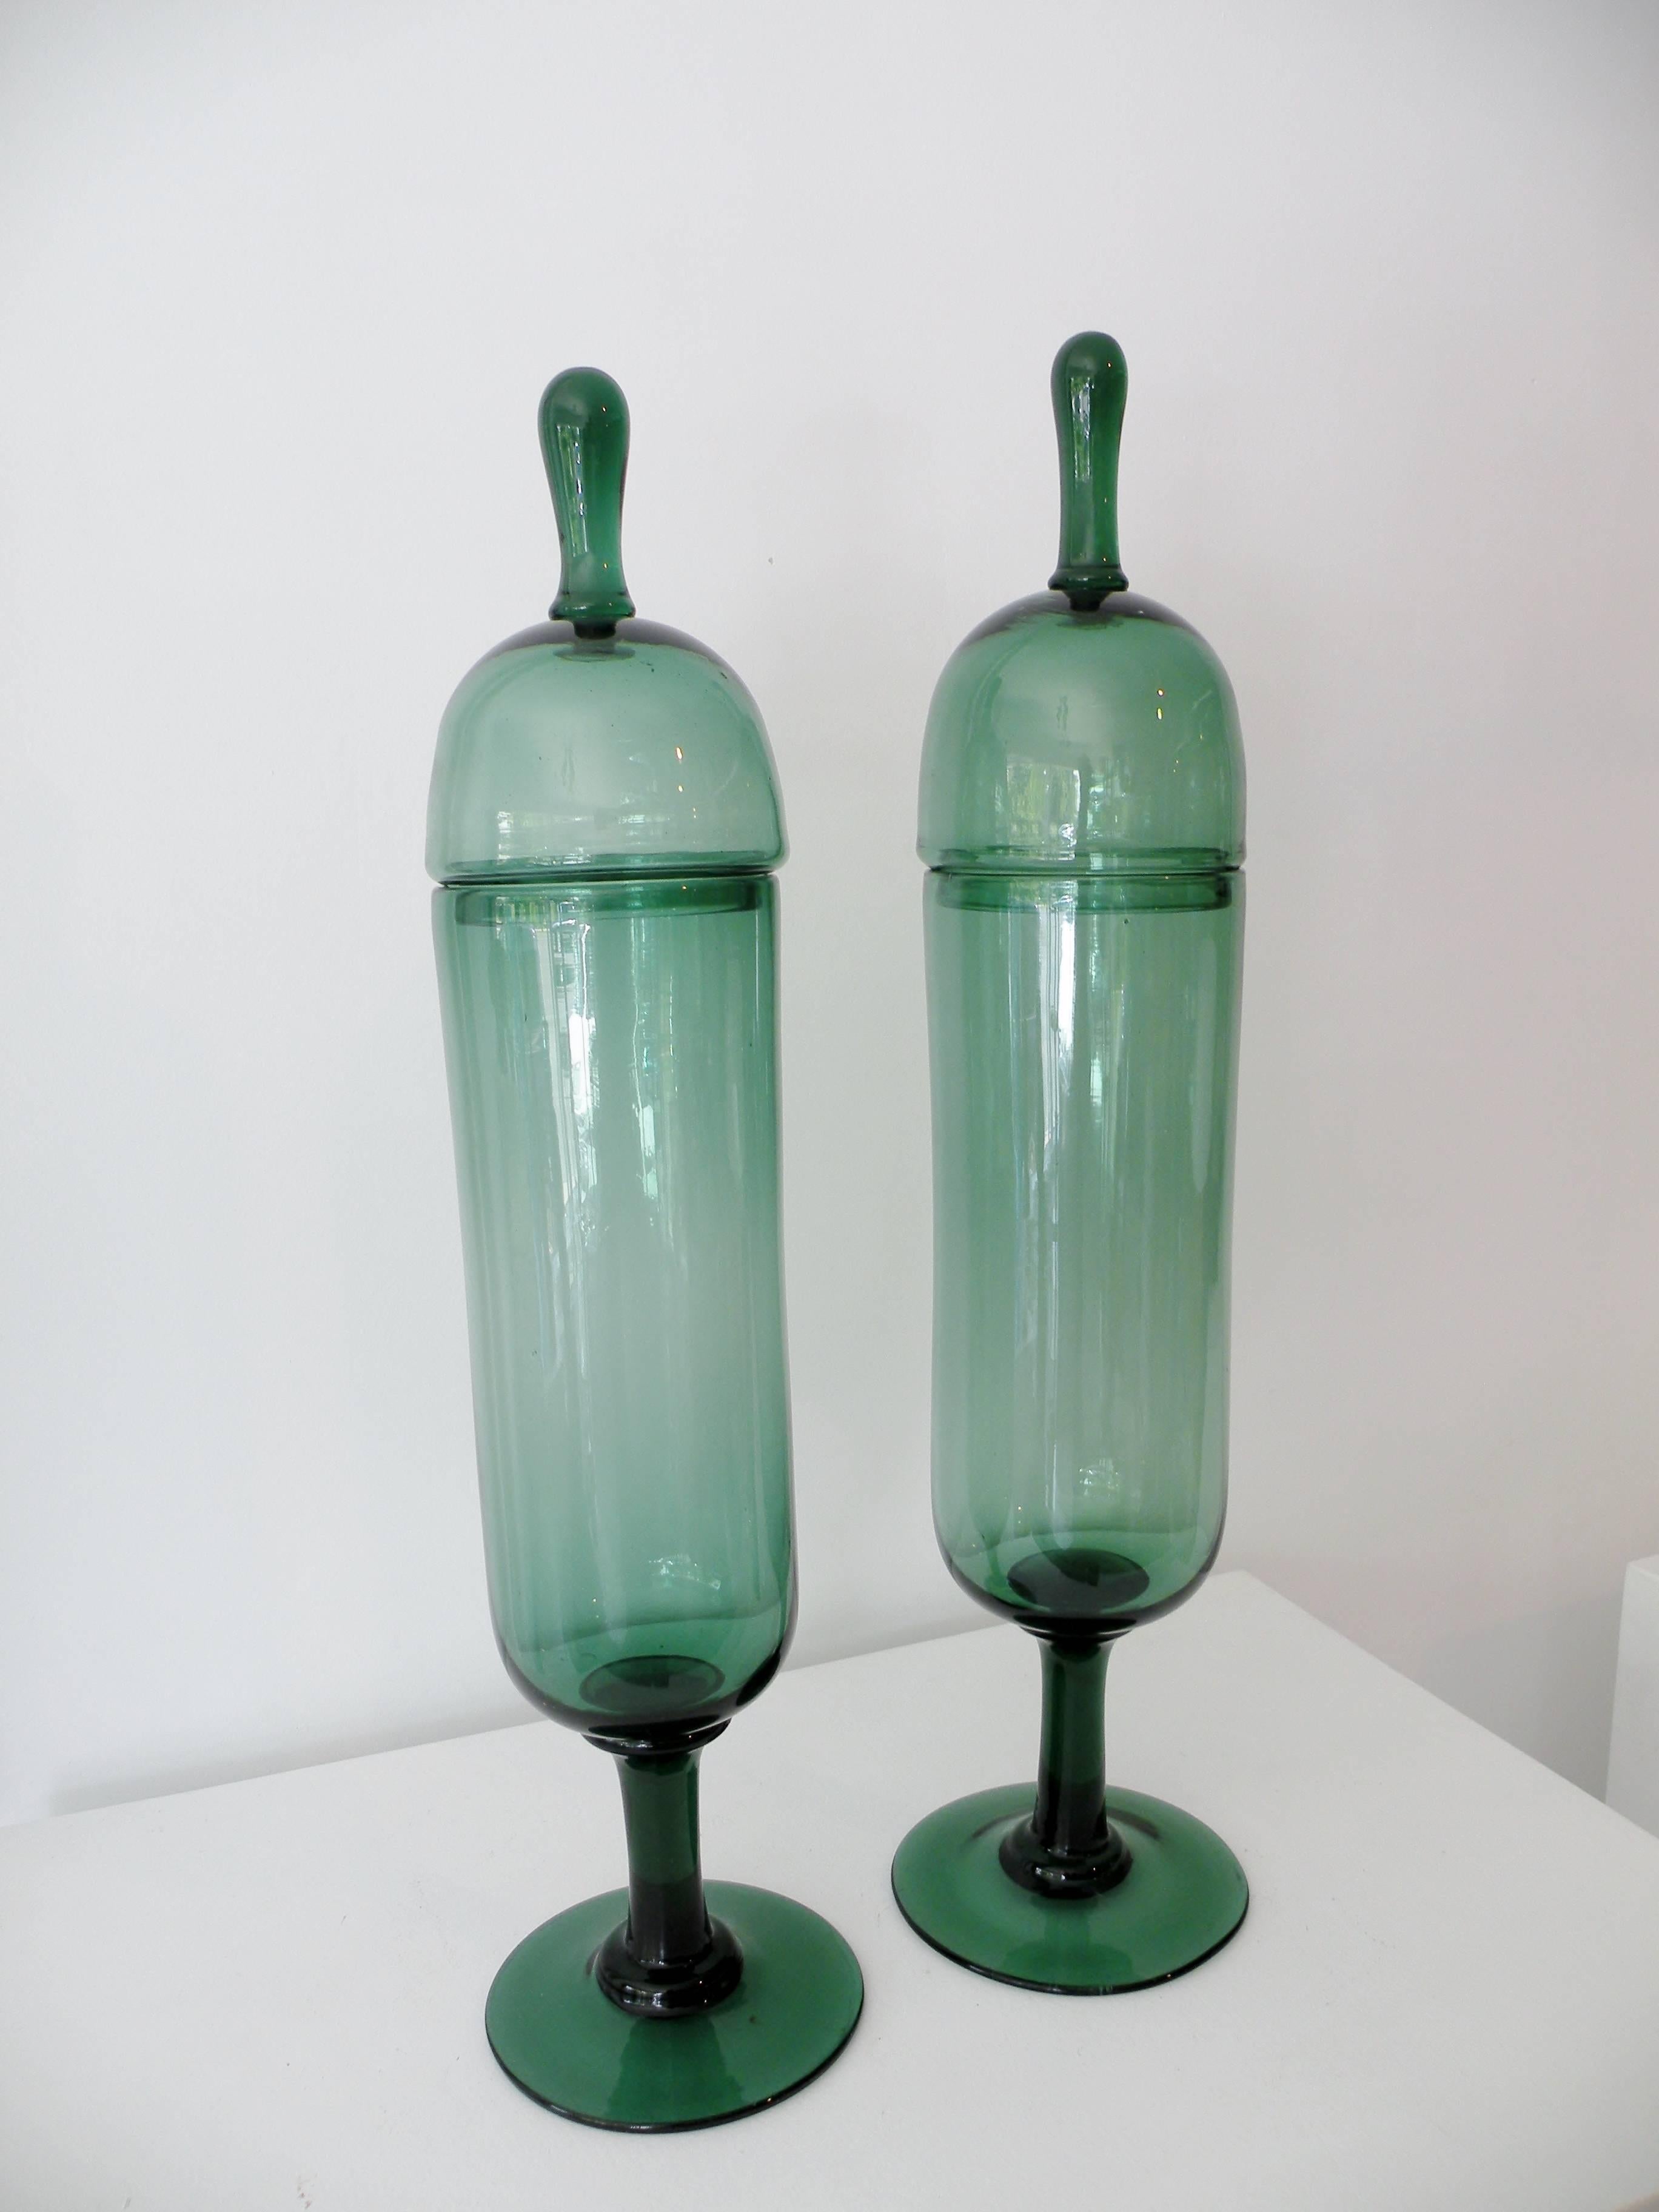 Pair of large sculptural Italian modernist Empoli art glass lidded apothecary jars in the verde green color, both approximately 5